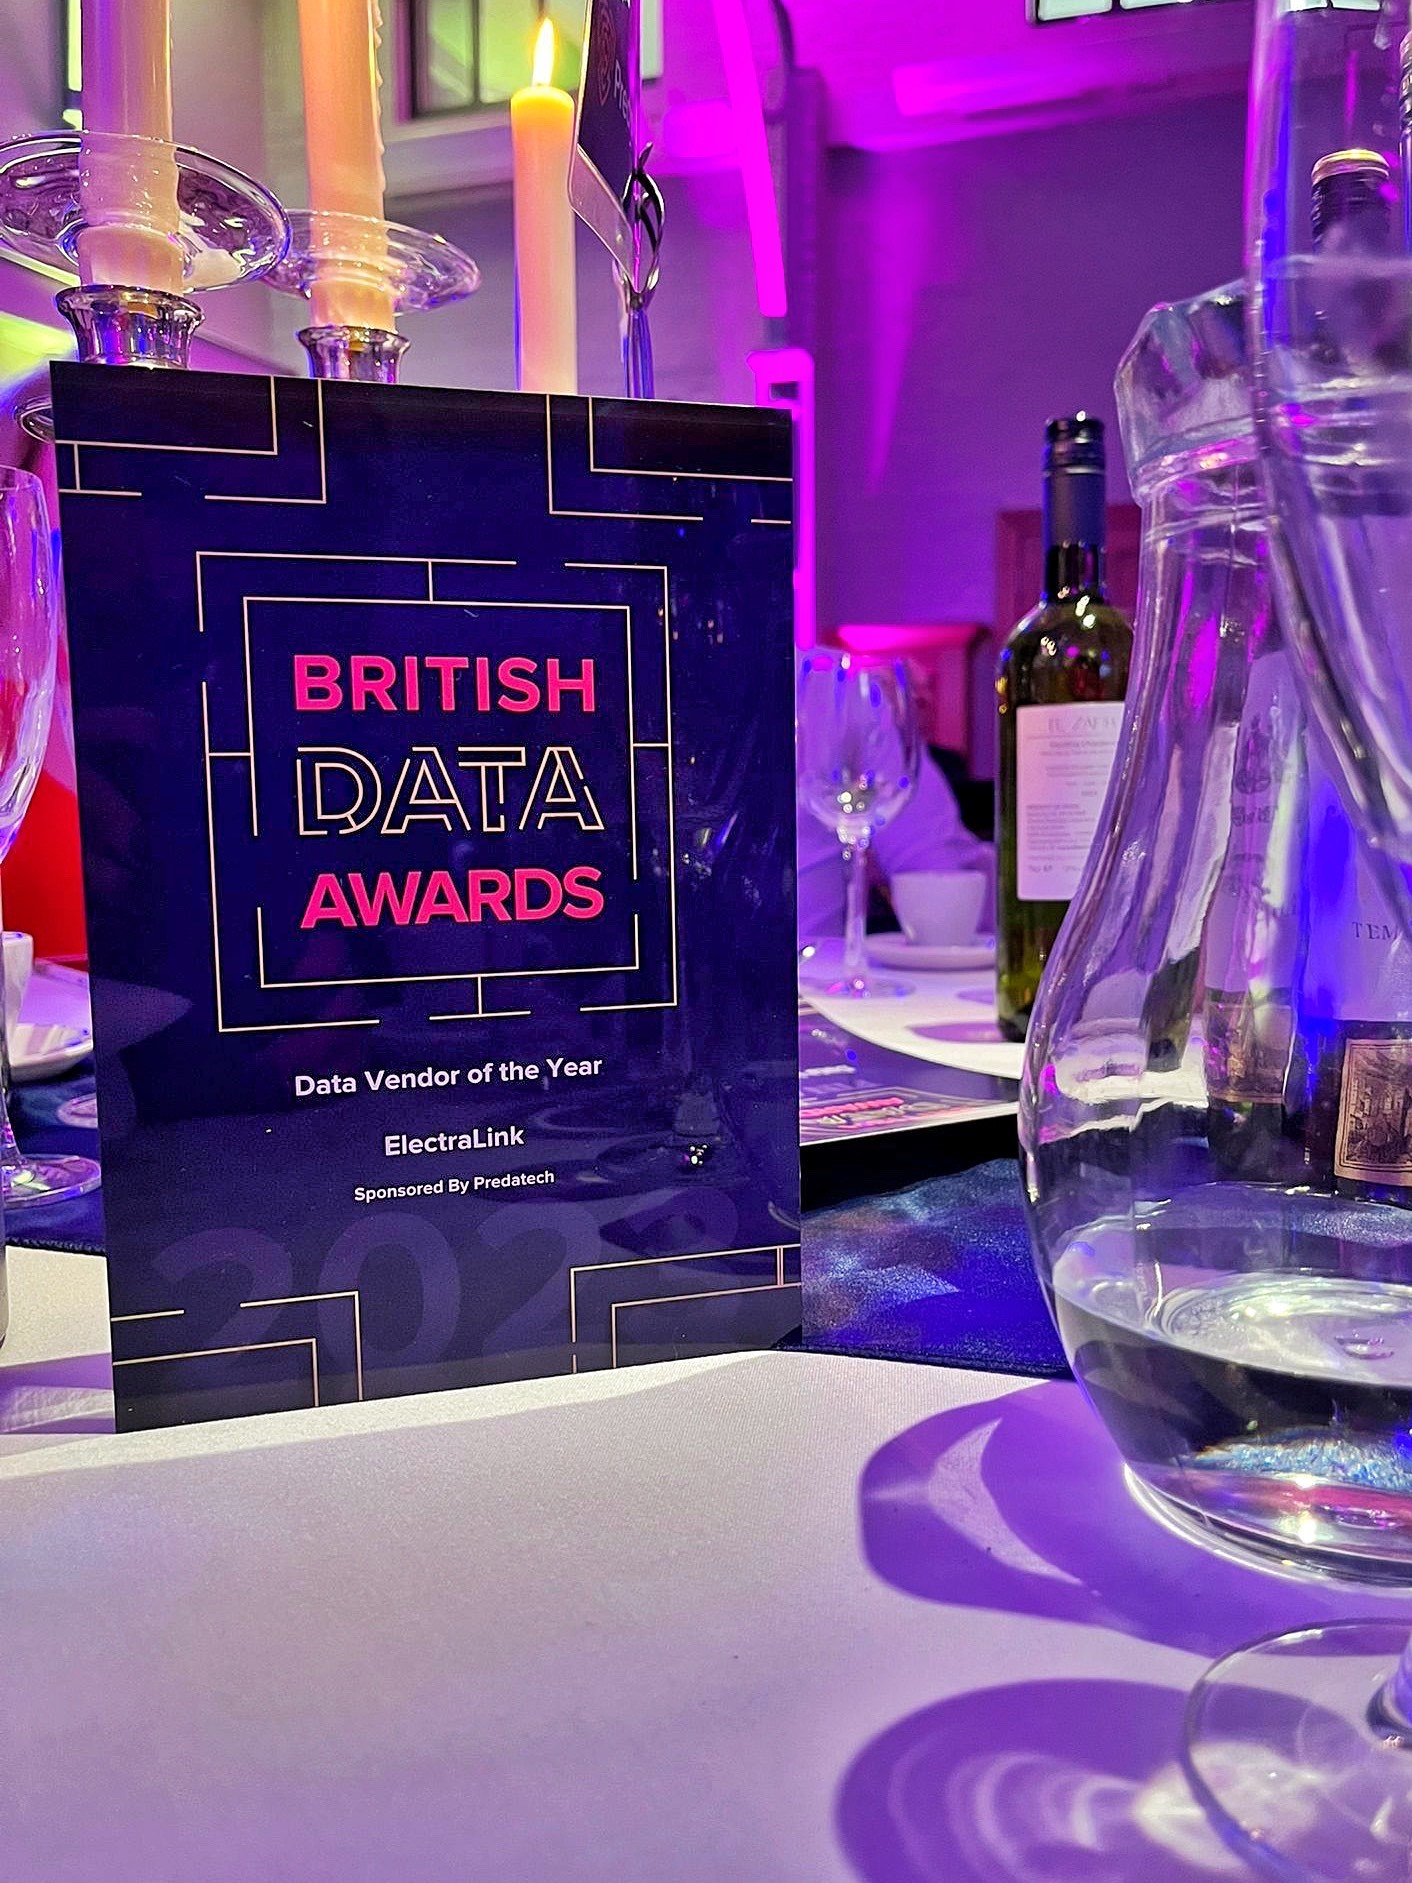 British Data Award trophy on a table beside glassware on a white tablecloth.